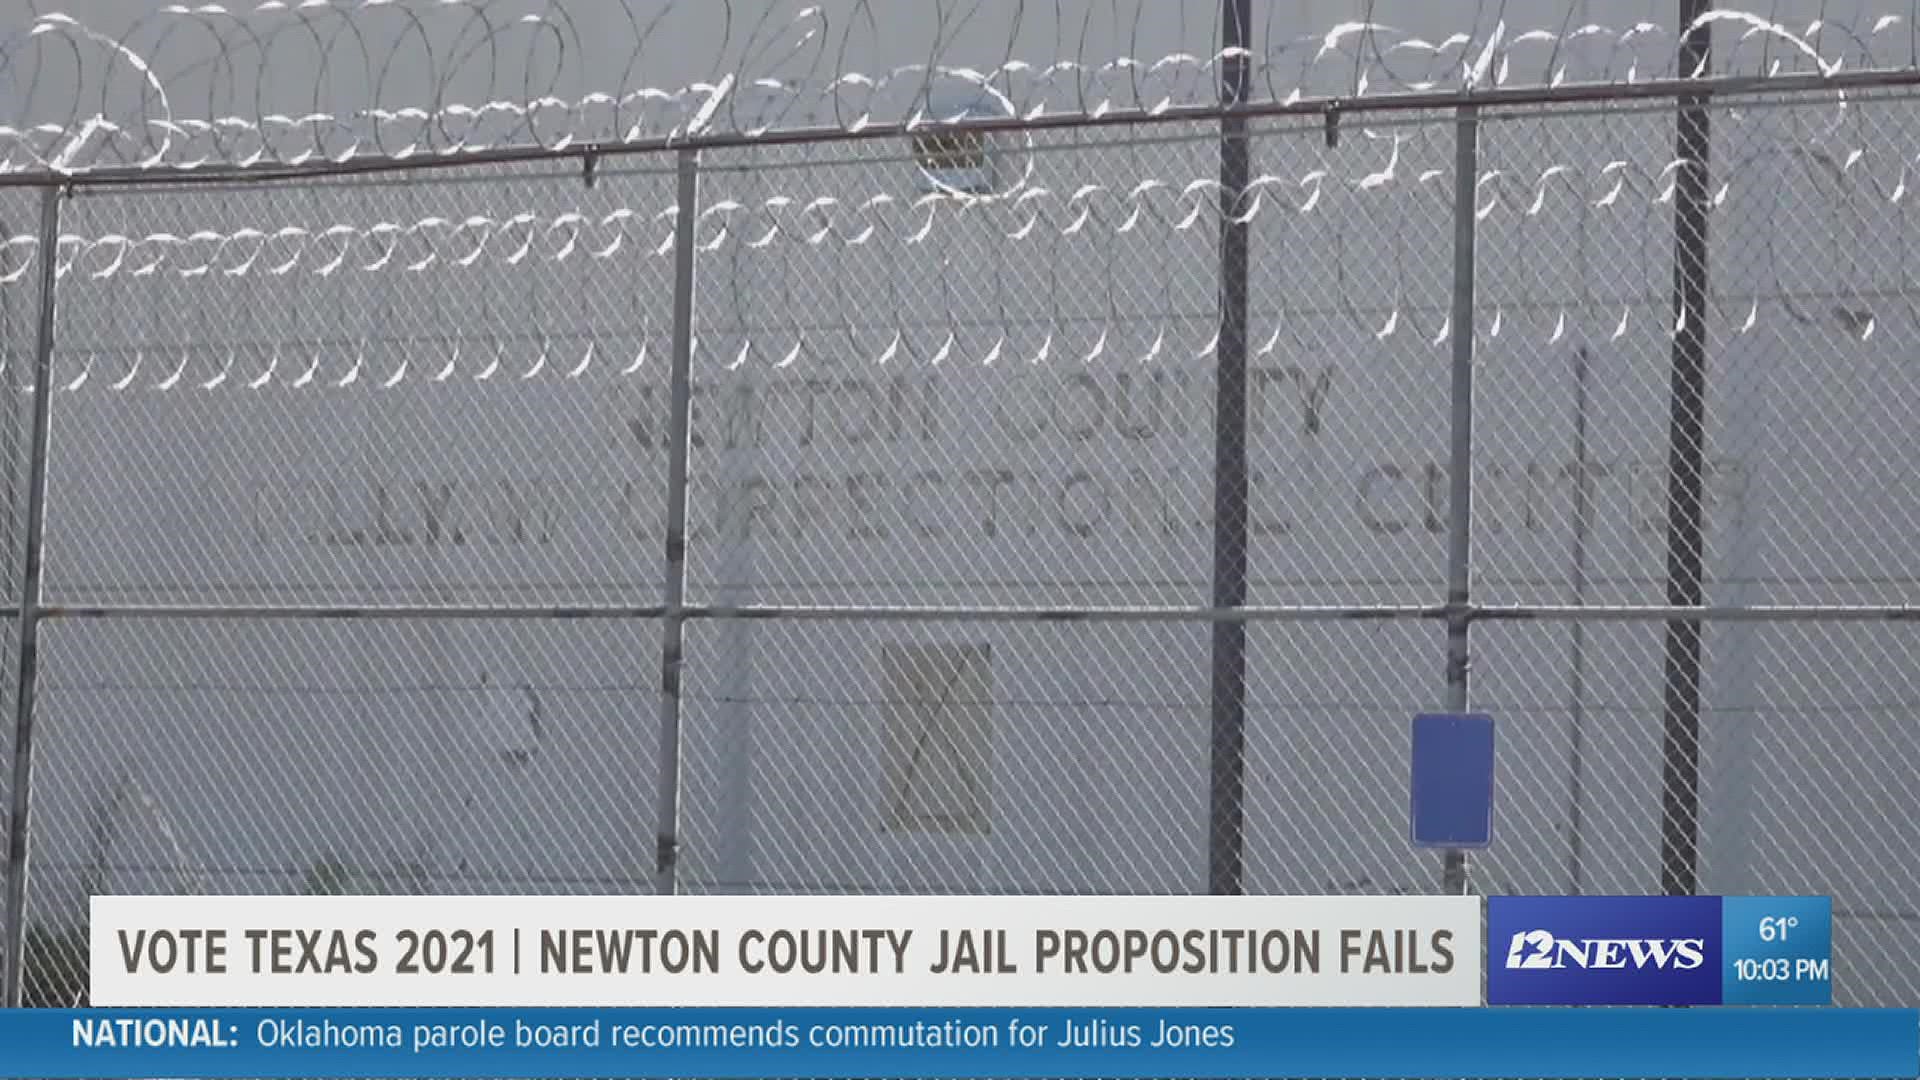 Voters in Newton County said no to approving a $12M bond proposition to create a new jail and law enforcement center.